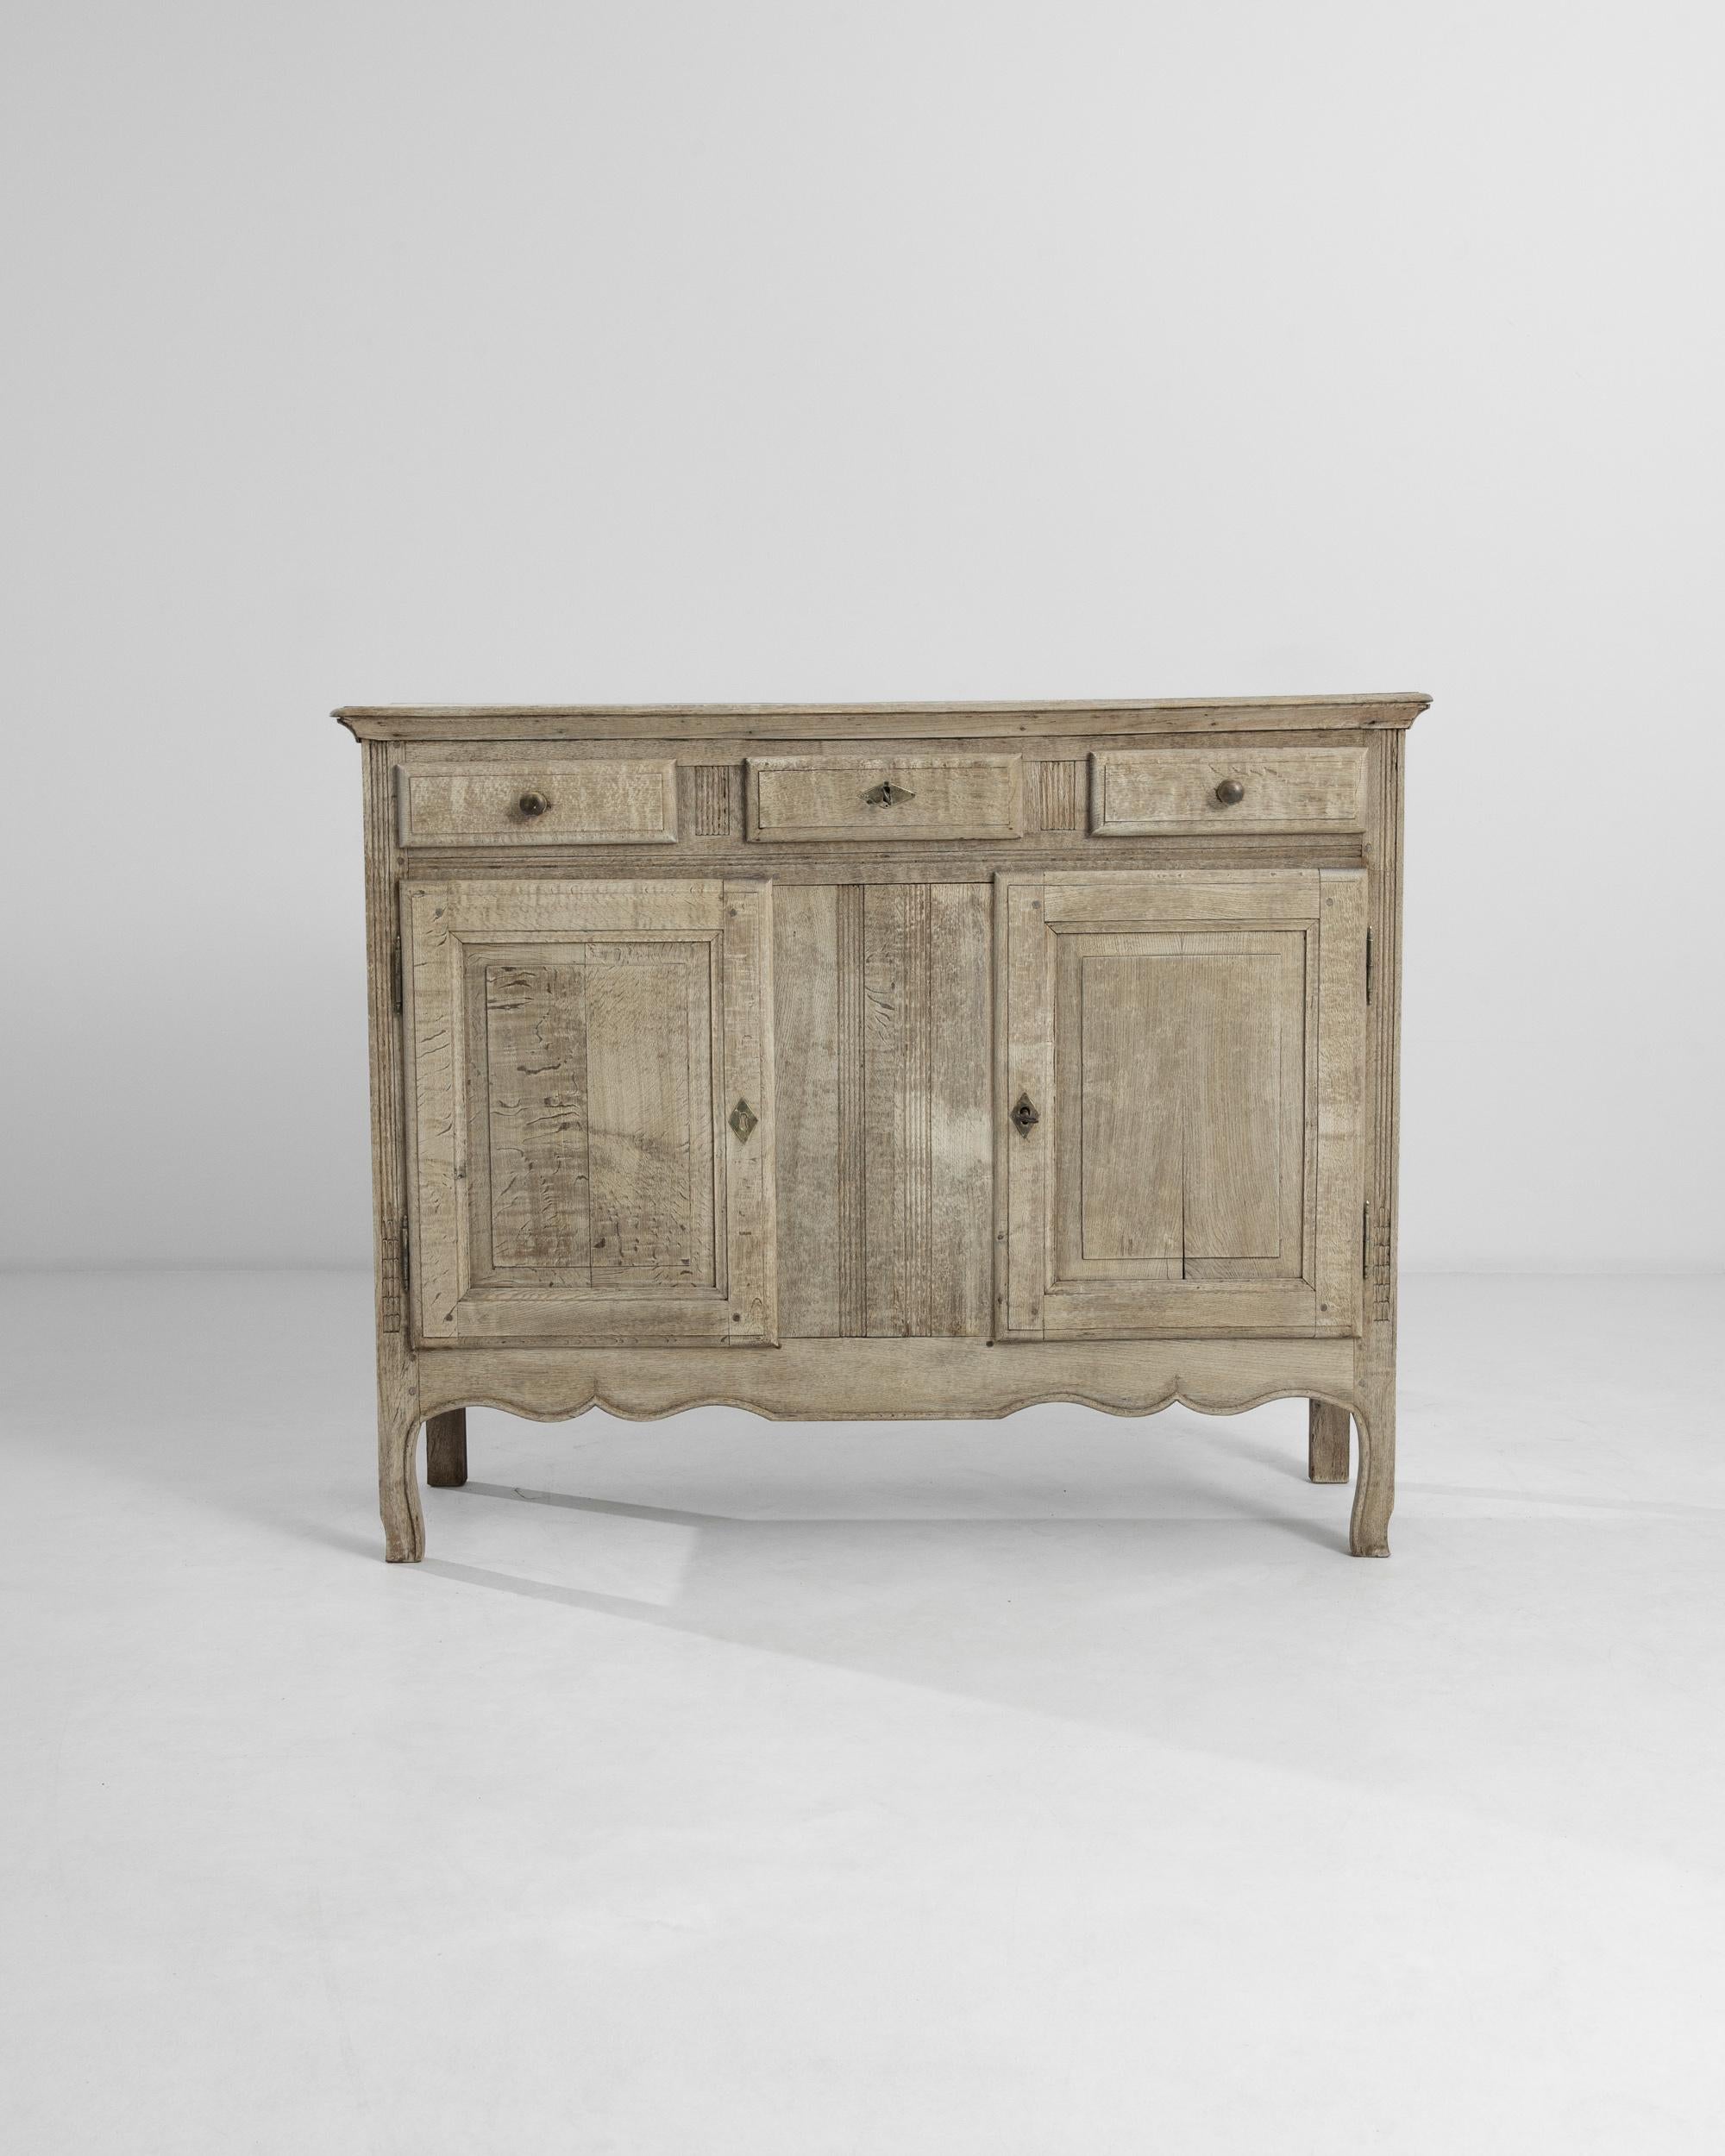 A 19th century bleached oak buffet made in France. Modestly decorated with a scalloped skirt and molded cornice, the chest features three shallow drawers and two square panel doors held up by a pair of slightly curvy front feet. The dim shining of